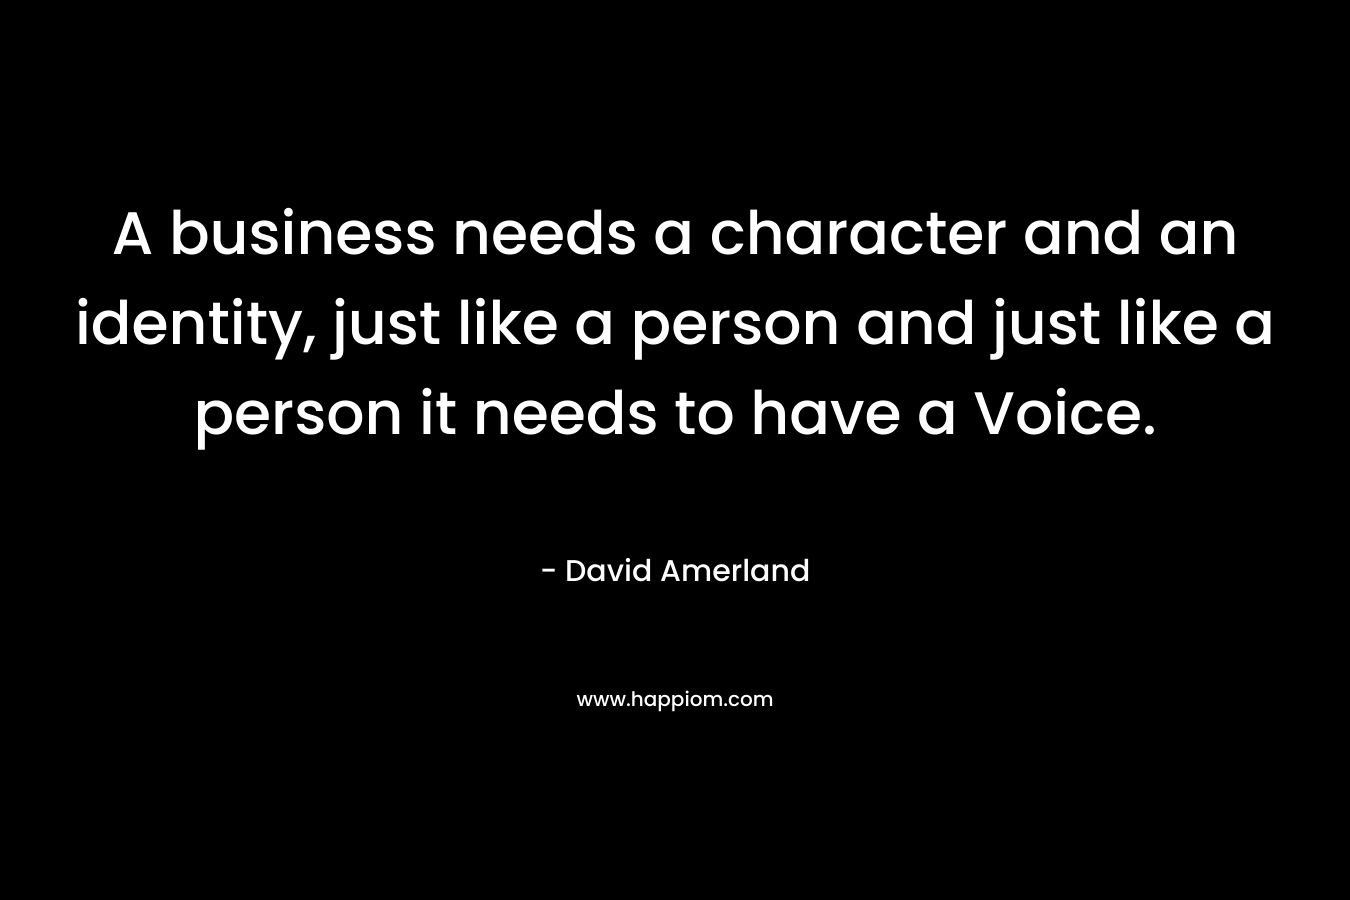 A business needs a character and an identity, just like a person and just like a person it needs to have a Voice. – David Amerland